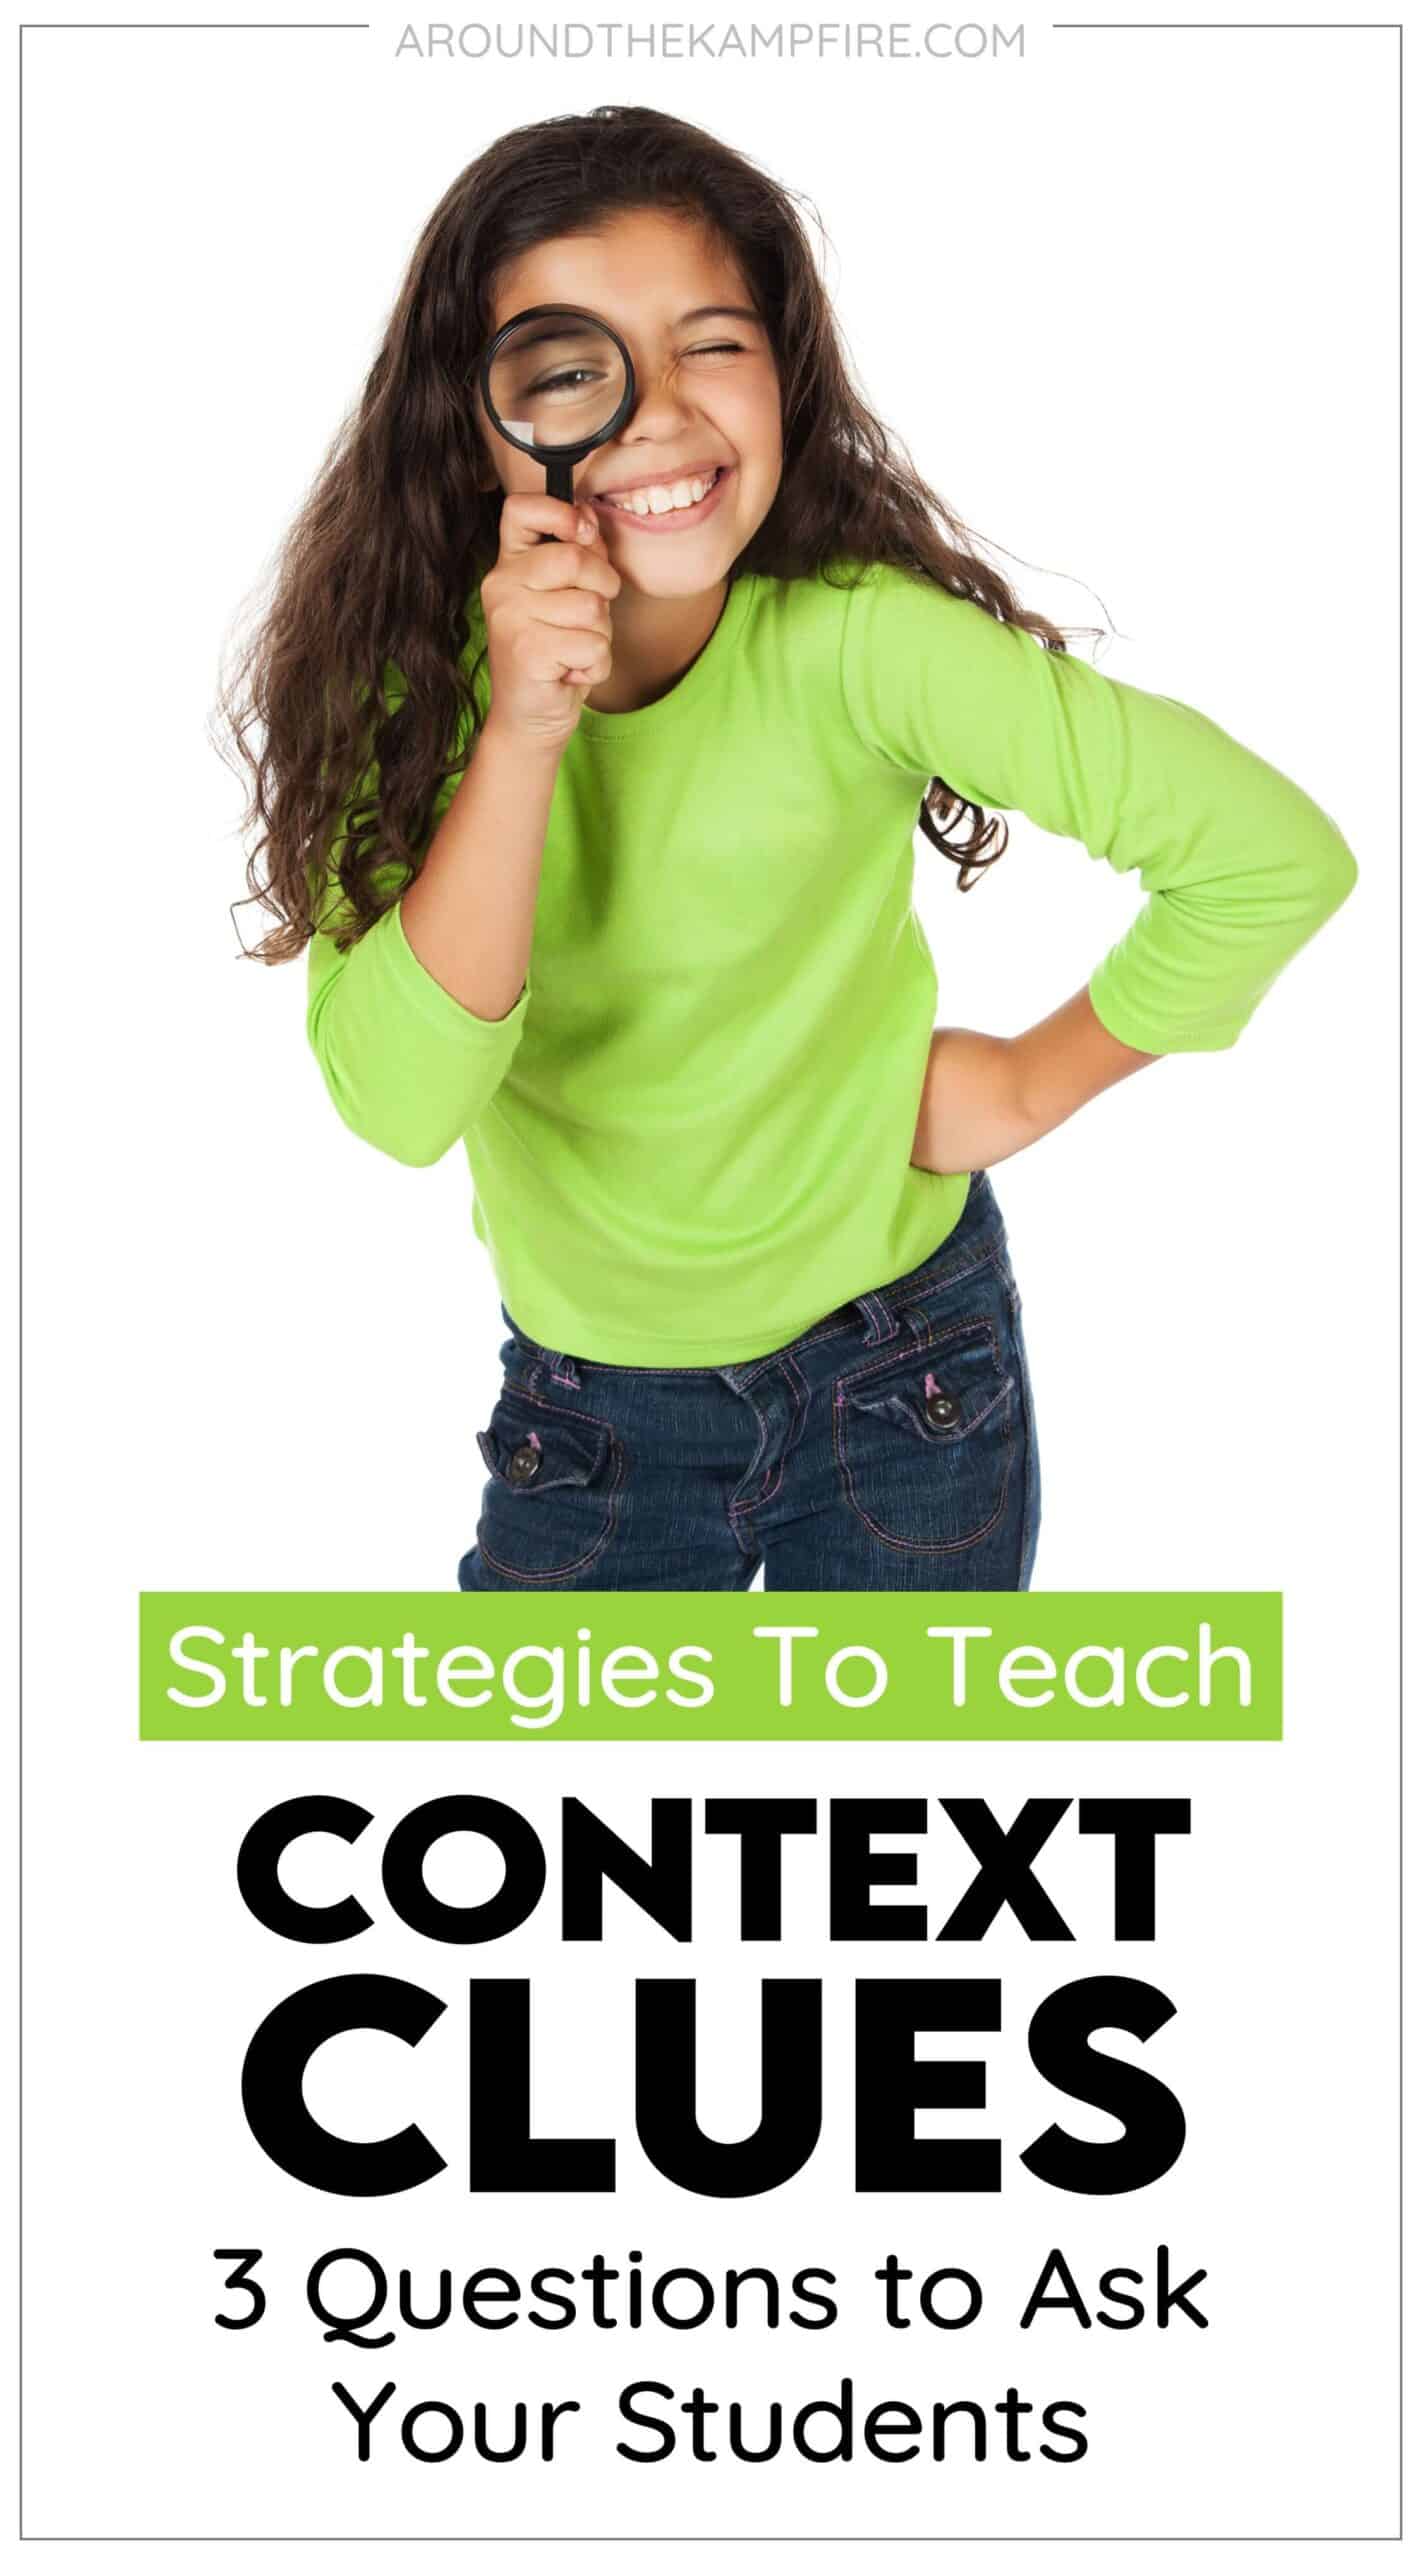 Strategies for teaching context clues to build reading comprehension